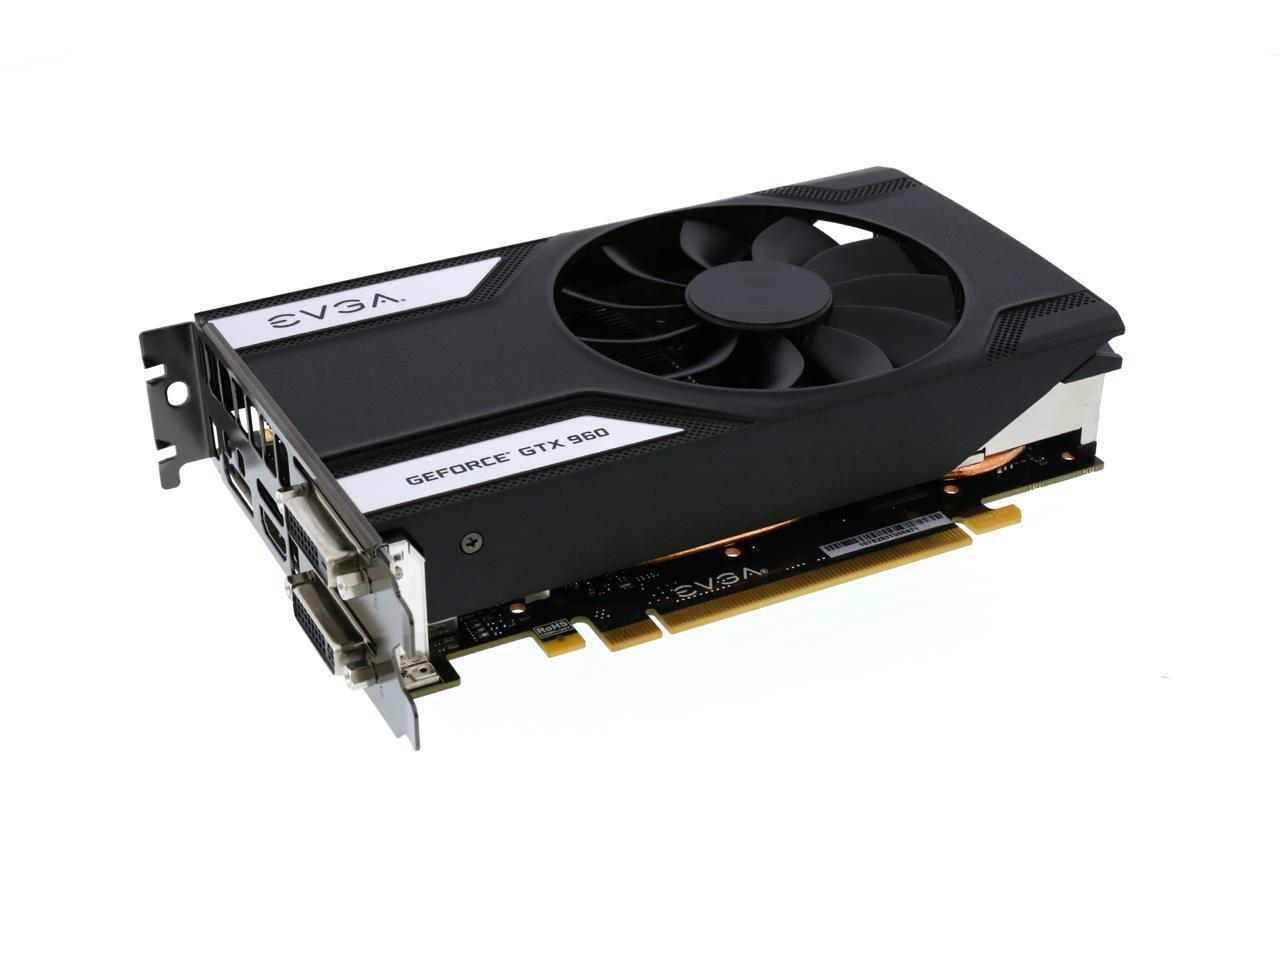 Evga Geforce Gtx 960 04g P4 1962 Kr 4gb Sc Gaming Only 6 8 Inches Perfect For Mitx Build Graphics Card Newegg Com